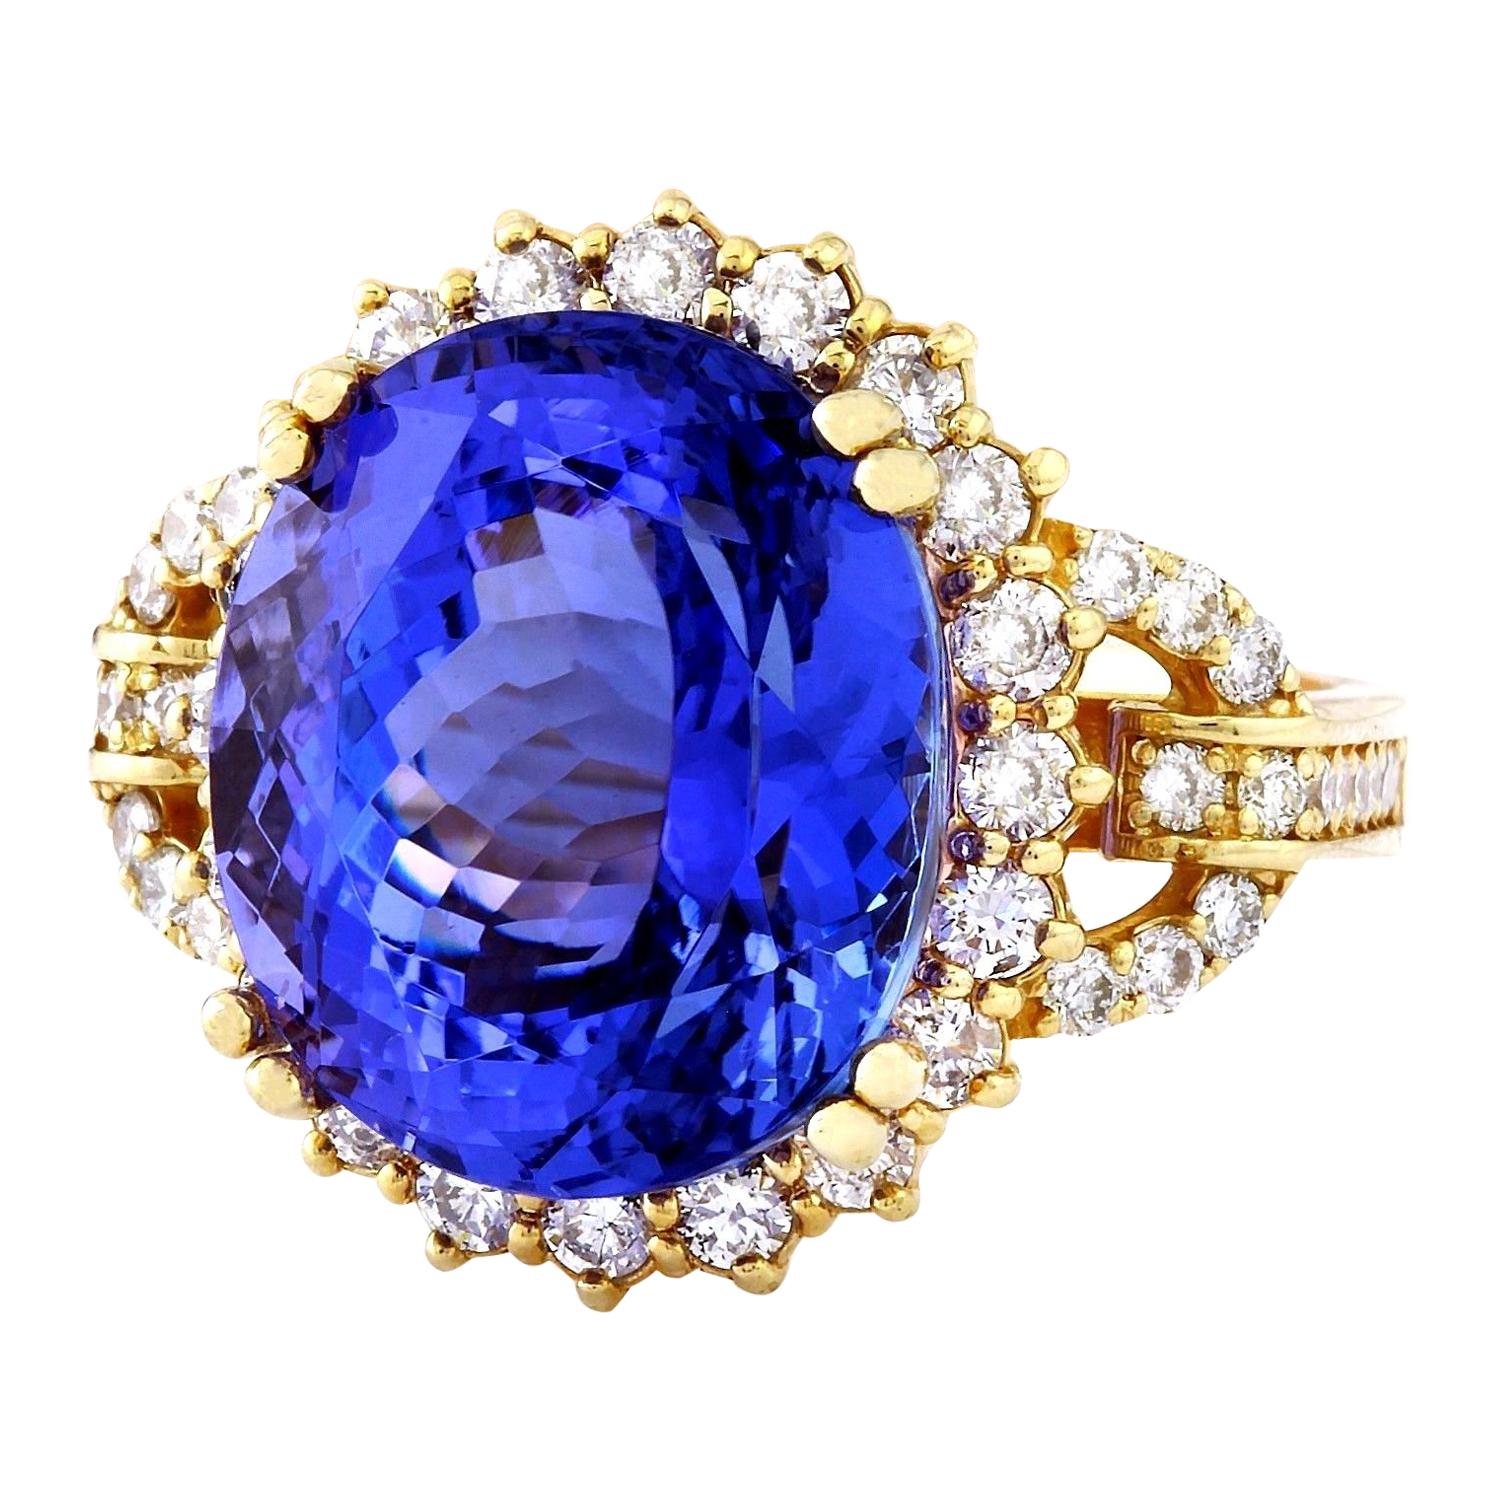 15.03 Carat  Tanzanite 14K Solid Yellow Gold Diamond Ring
Item Type: Ring
Item Style: Cocktail
Material: 14K Yellow Gold
Mainstone: Tanzanite
Stone Color: Blue
Stone Weight: 13.28 Carat
Stone Shape: Oval
Stone Quantity: 1
Stone Dimensions: